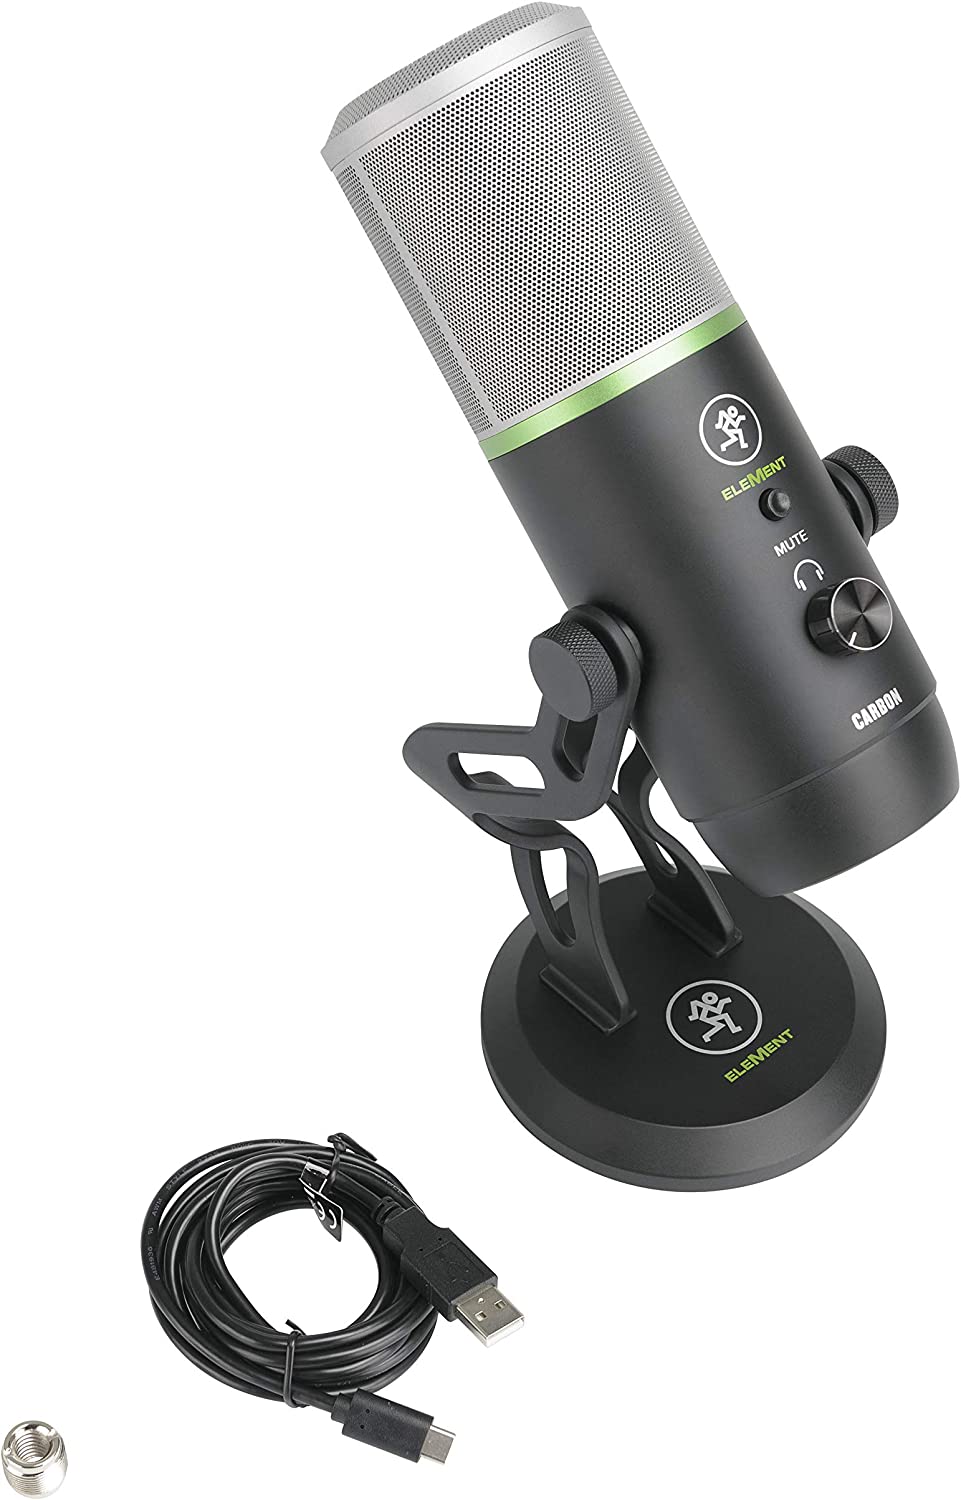 Mackie Carbon Premium USB Condenser Microphone for Content Creation, Live Streaming and Mobile Recording